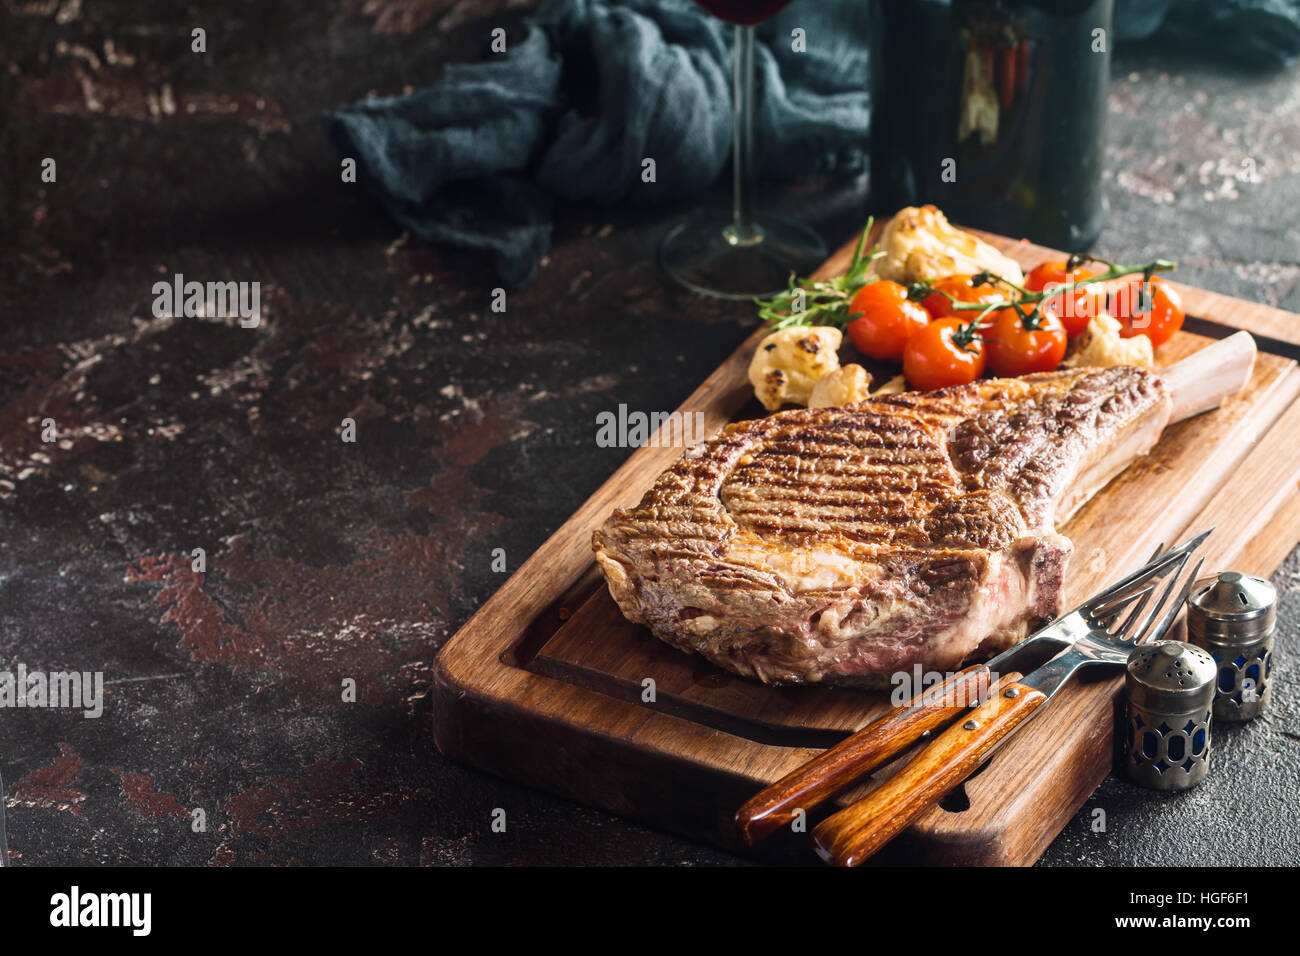 Succulent grilled tomahawk beef steak on the bone with red wine, seasonings, fresh rosemary and grilled vegetables on cutting board Stock Photo